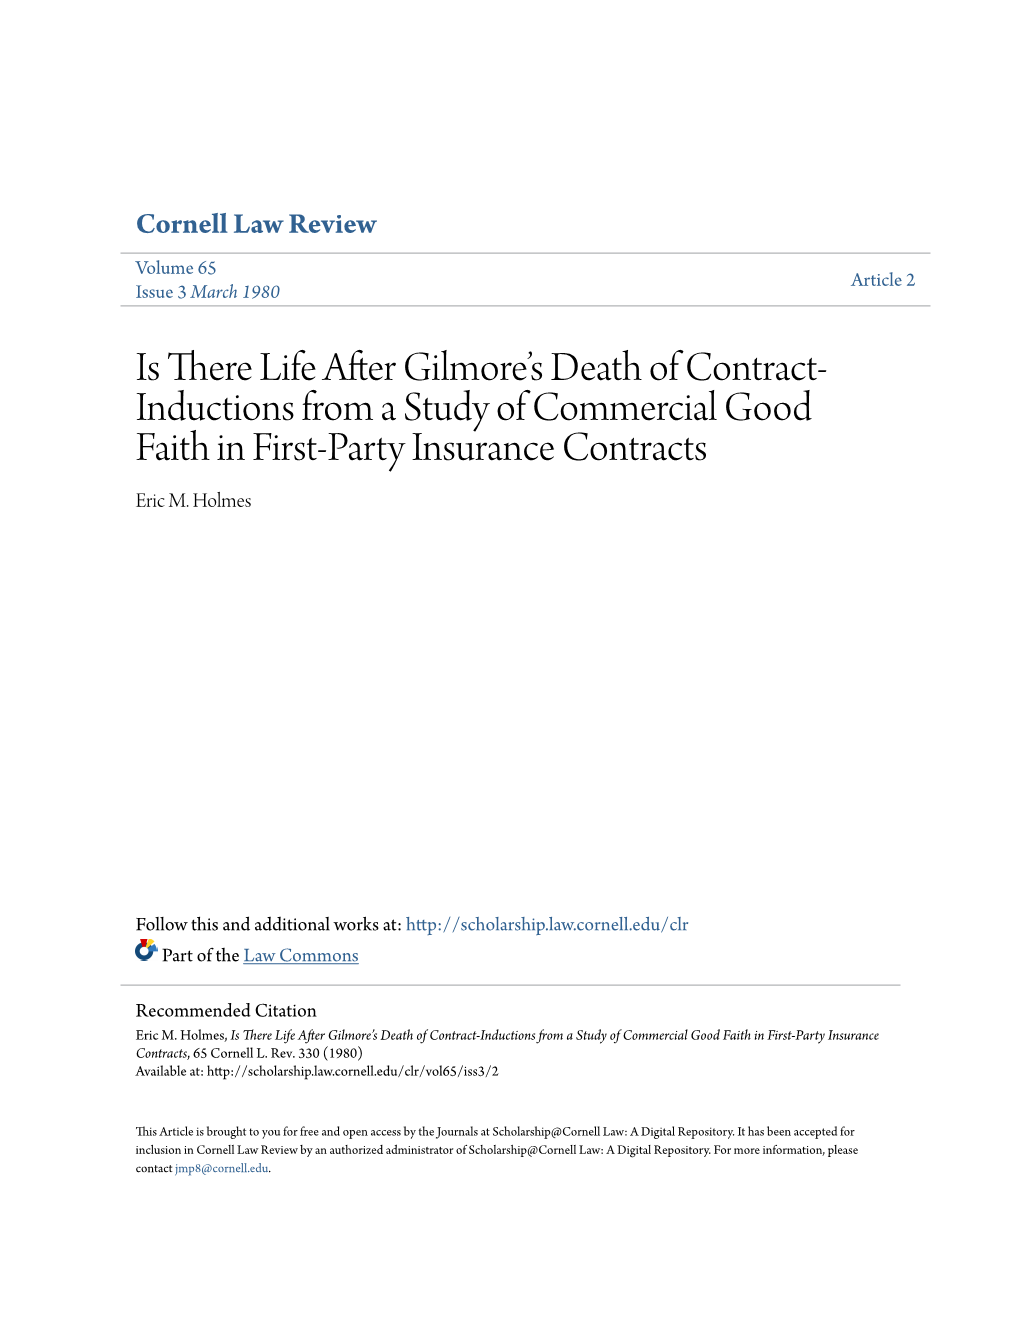 Is There Life After Gilmore's Death of Contract-Inductions from a Study of Commercial Good Faith in First-Party Insurance Cont